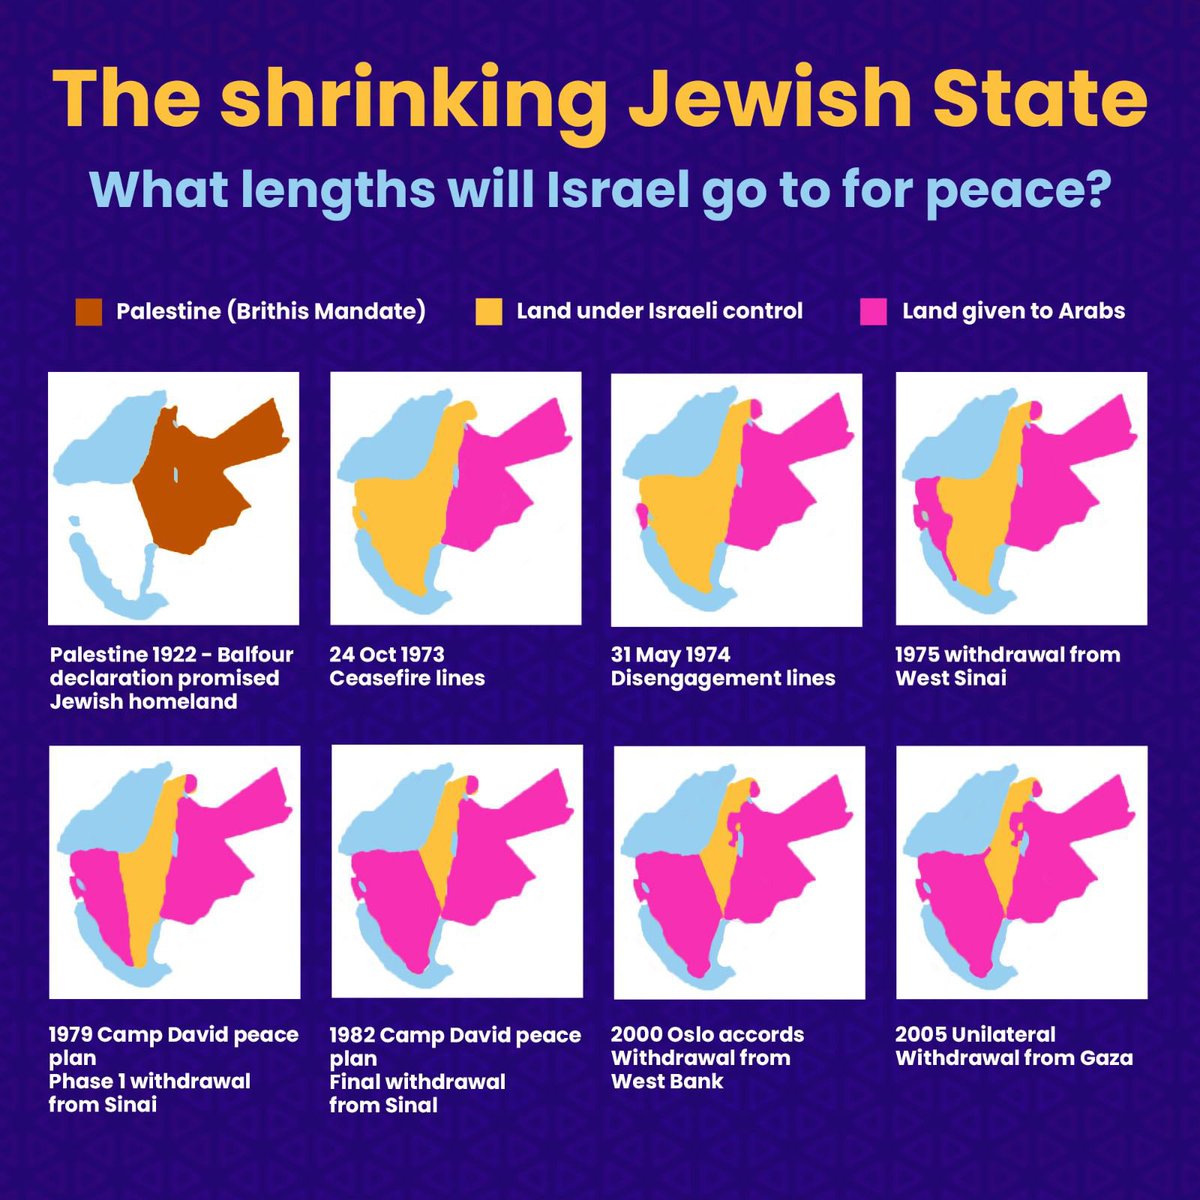 The shrinking Jewish State: What lengths will Israel go to for peace? 

#indigenousrights #zionism #israel #judea #jewishcivilrights #civilrights #history #endjewhatred